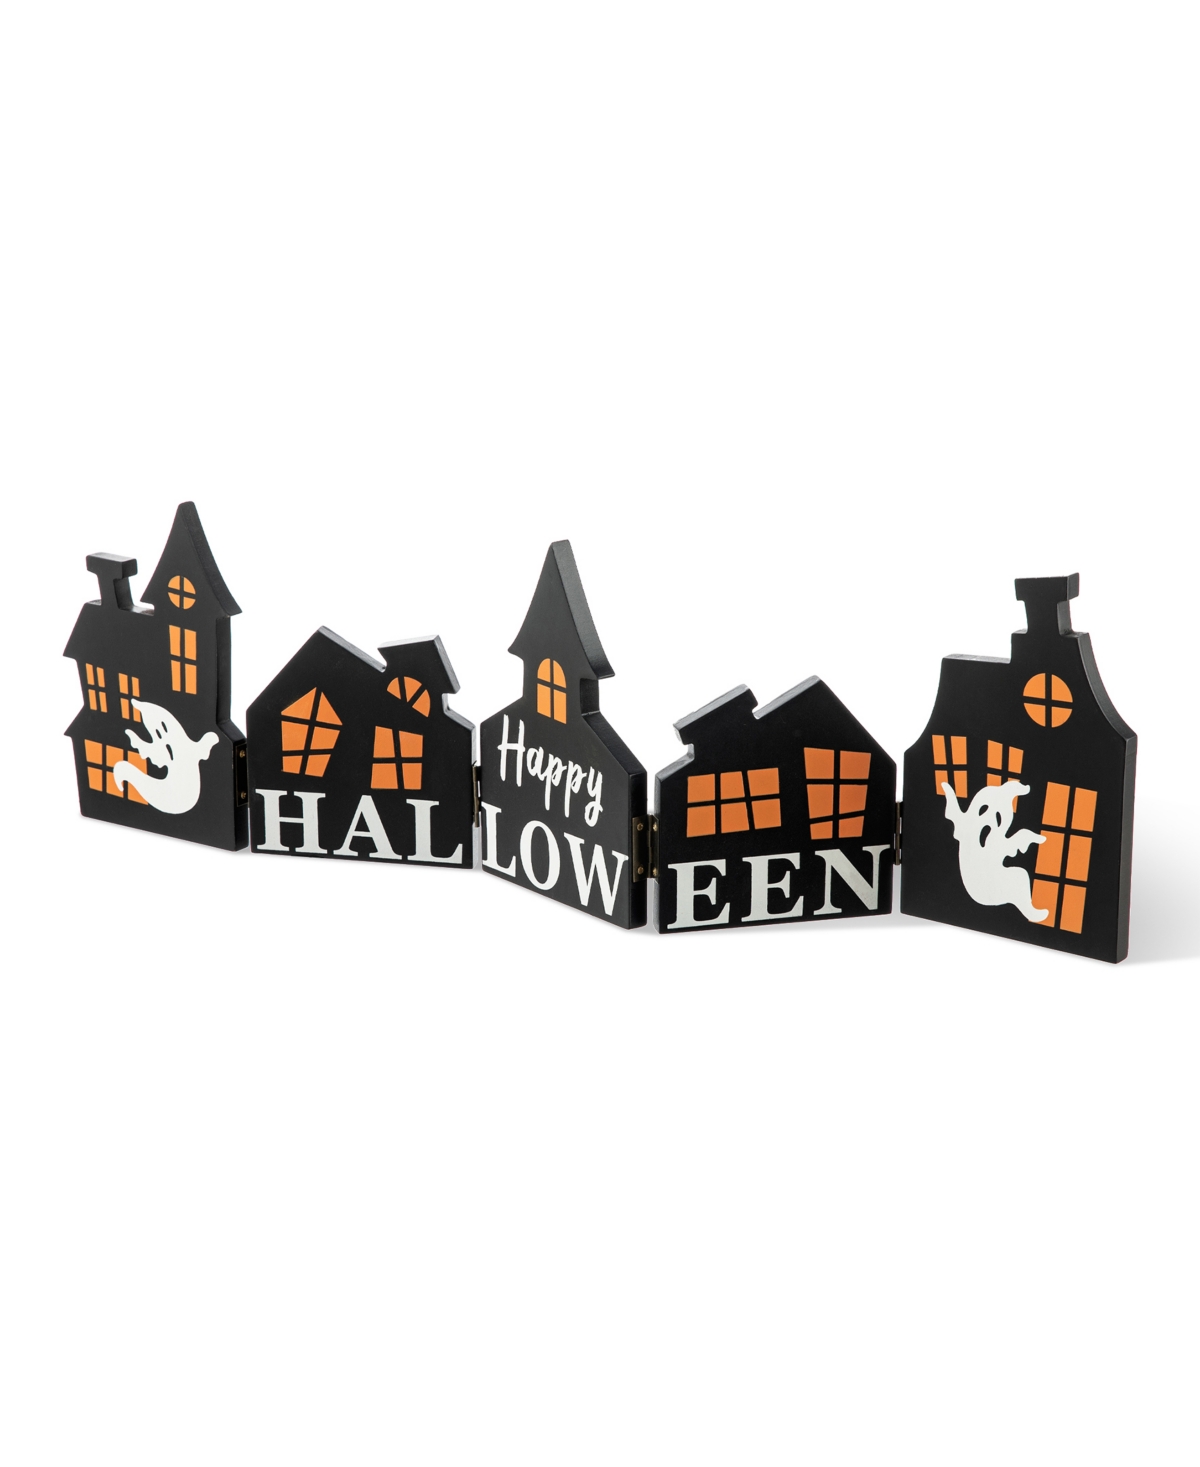 Glitzhome 24.75" L Halloween Wooden Hinged Haunted House Table Decor In Multi